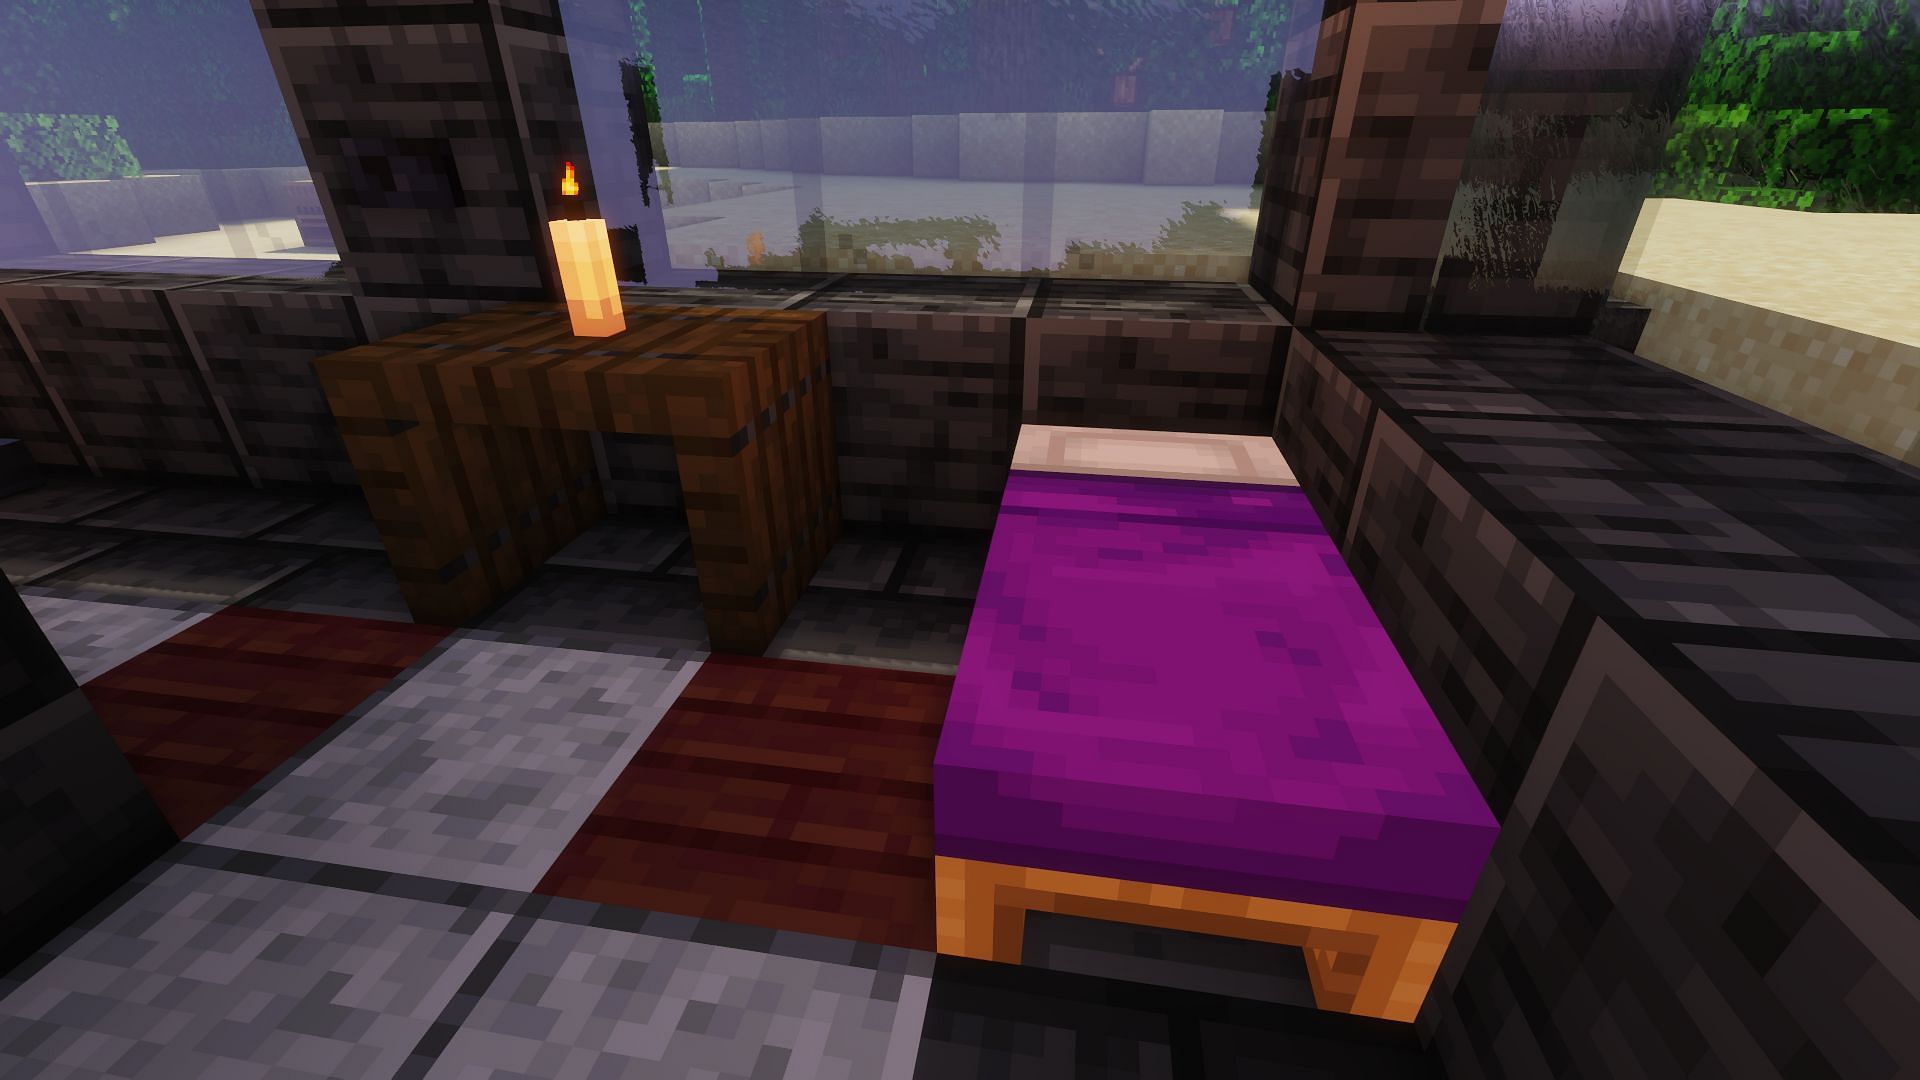 An example of a three trapdoor end table (Image via Minecraft)